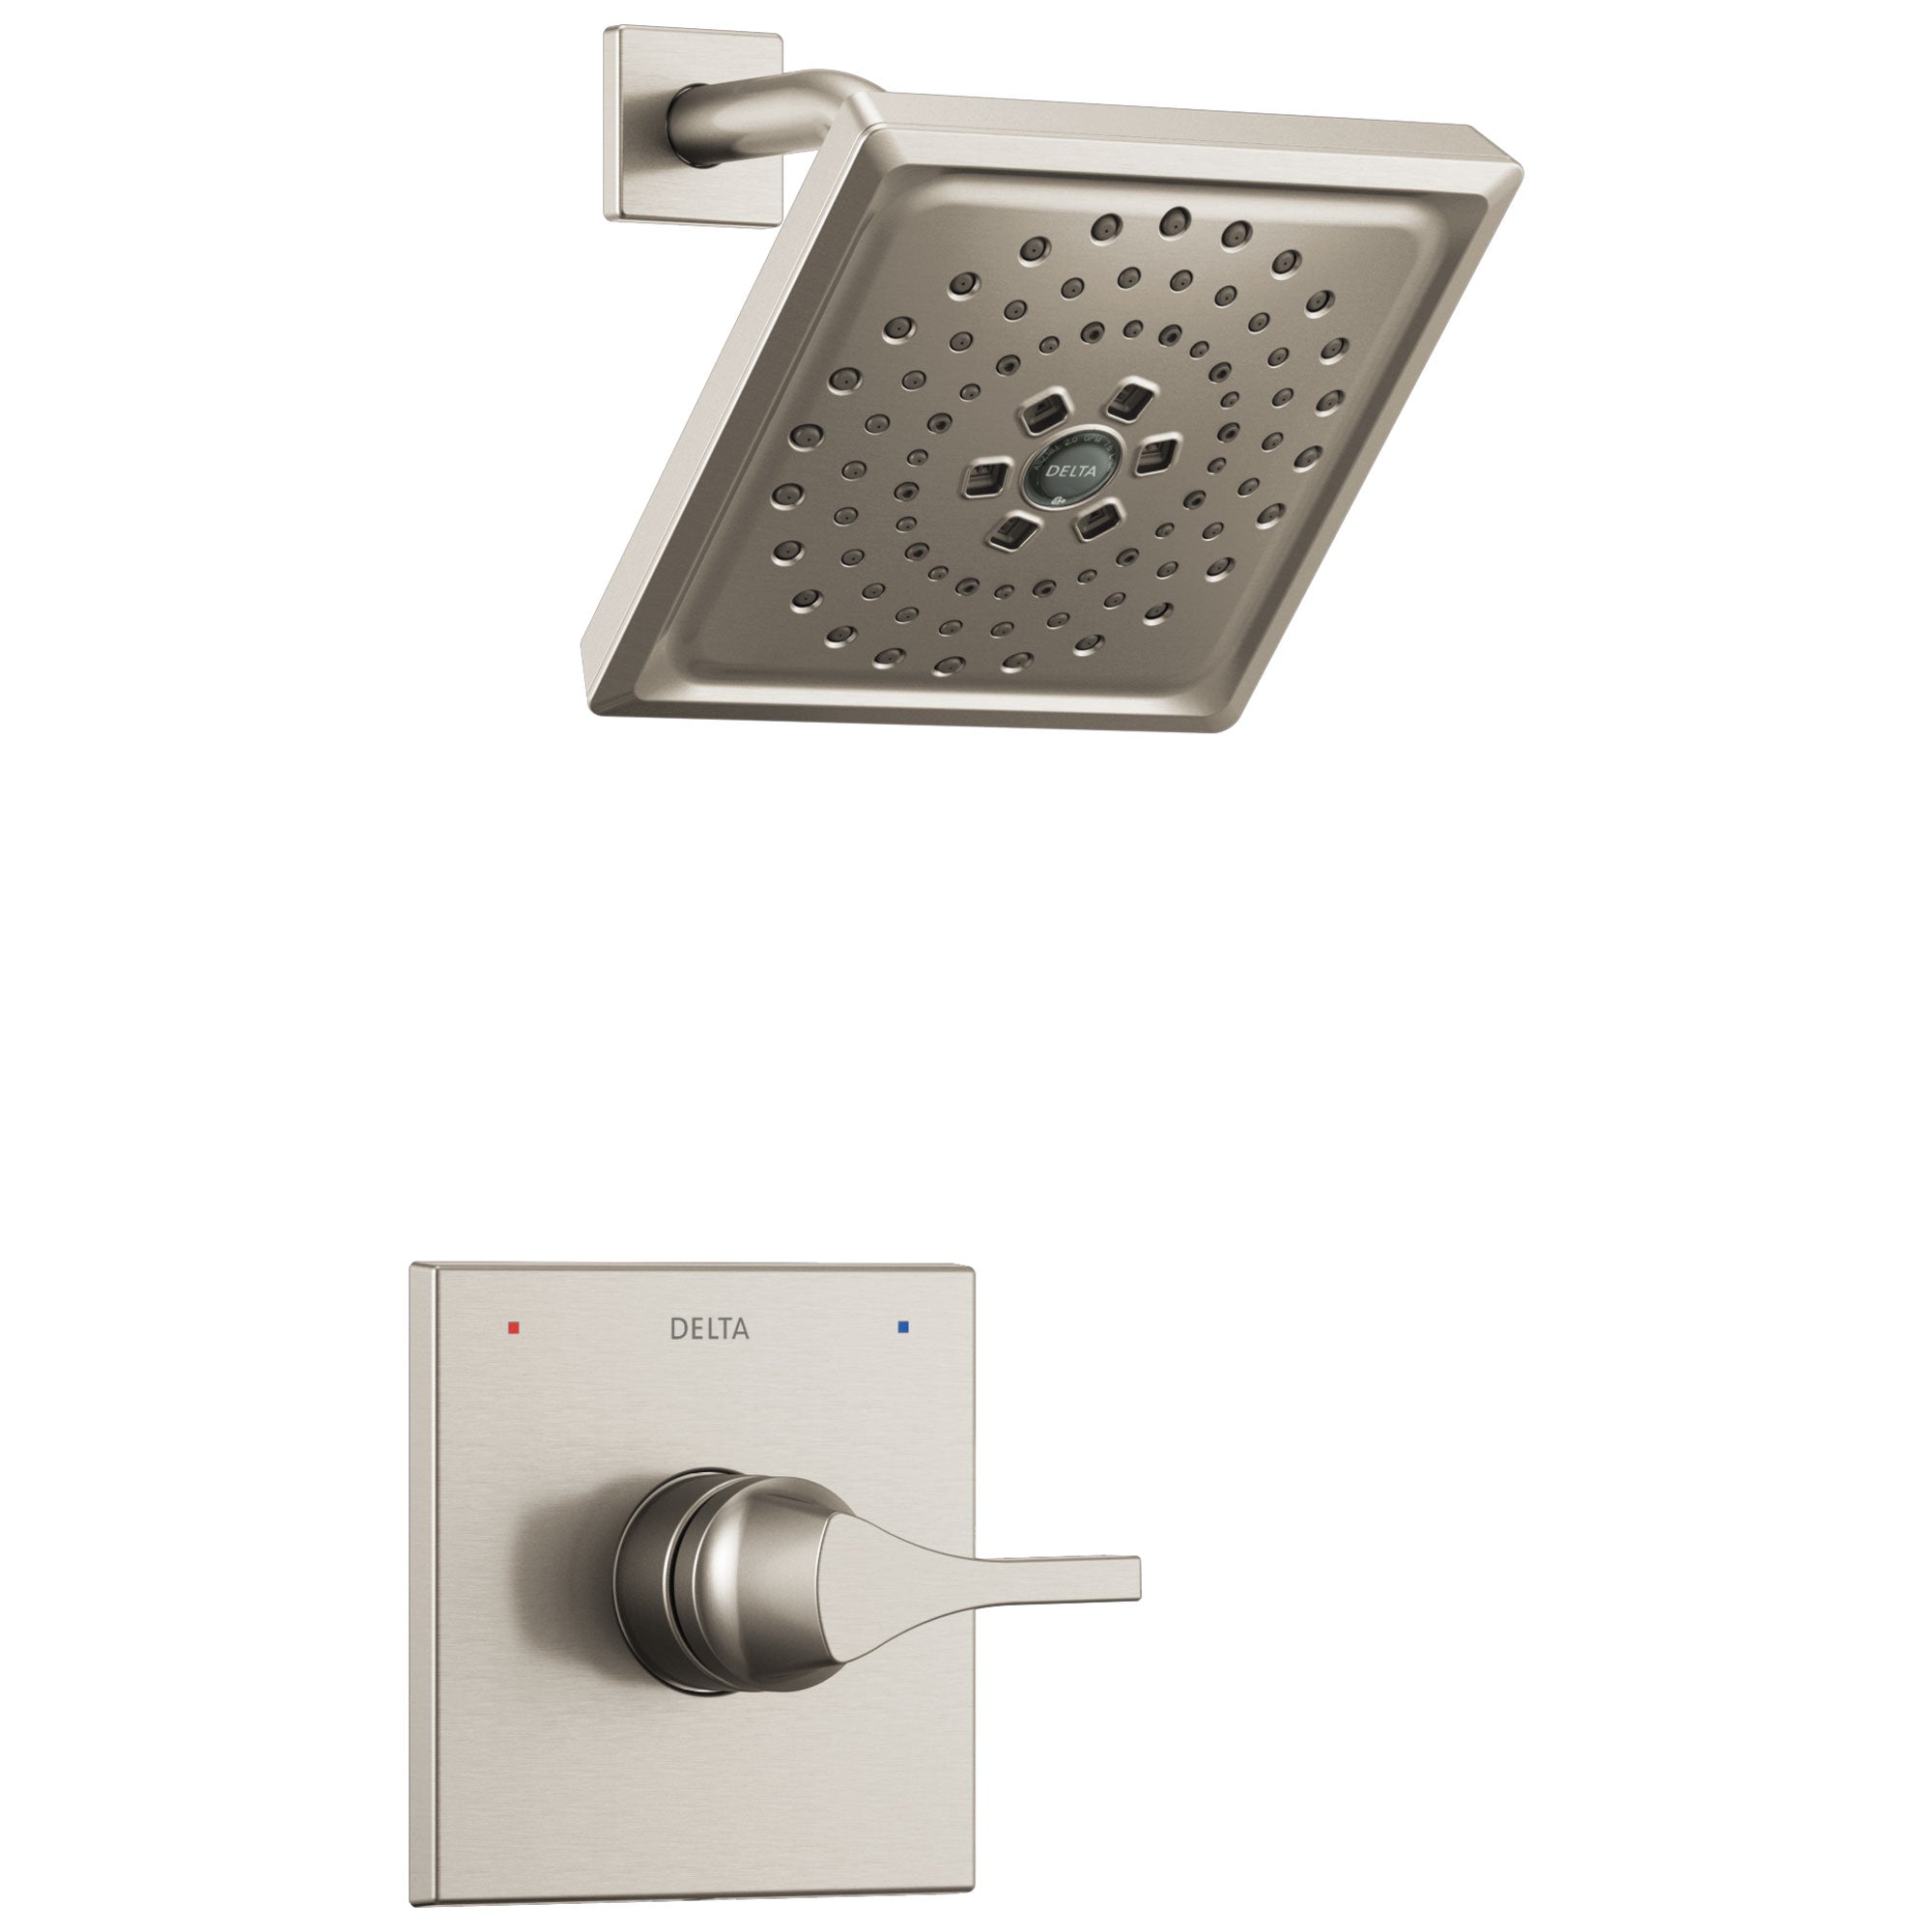 Delta Zura Collection Stainless Steel Finish Modern Single Handle Monitor 14 Shower only Faucet Includes Trim Kit and Rough-in Valve with Stops D2025V